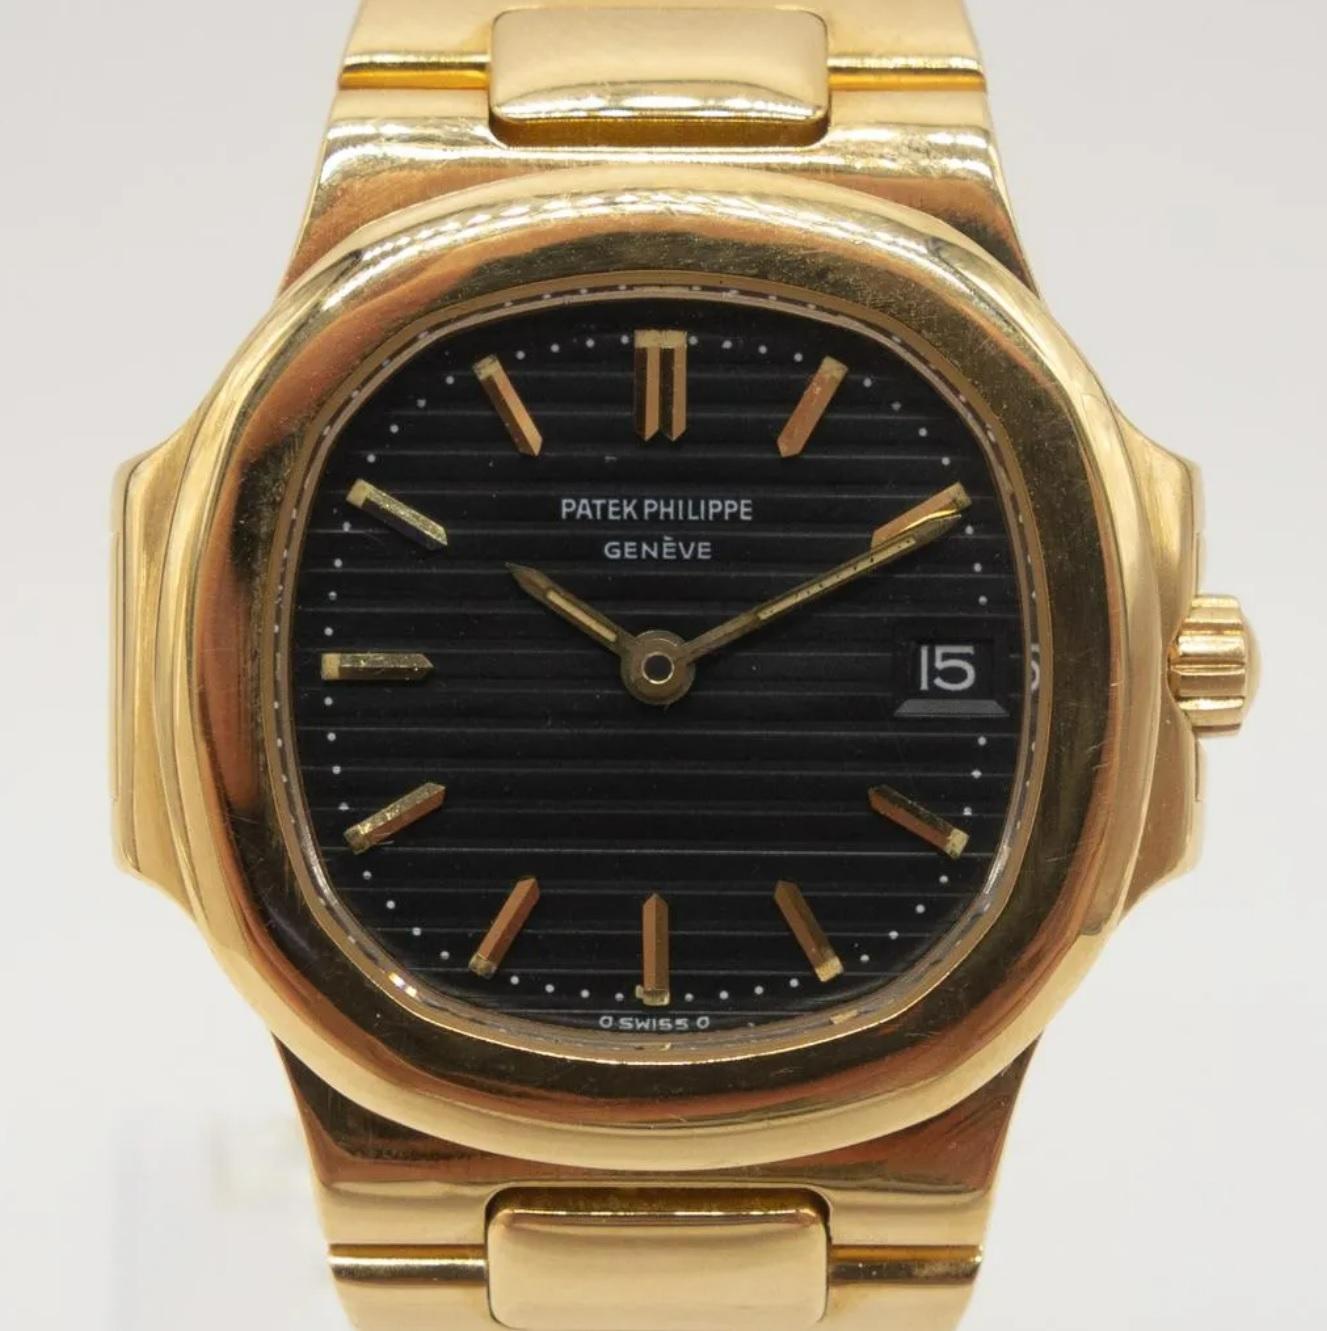 Vintage 1980s Patek Philippe Ladies Wristwatch, Nautilus 4700 in 18k yellow gold. Features a black ridged dial with the date at 3 o'clock and an 18K yellow gold bracelet.  Stamped Patek-Philippe Geneve Nautilus 750 

Case measures 27mm x 29mm,